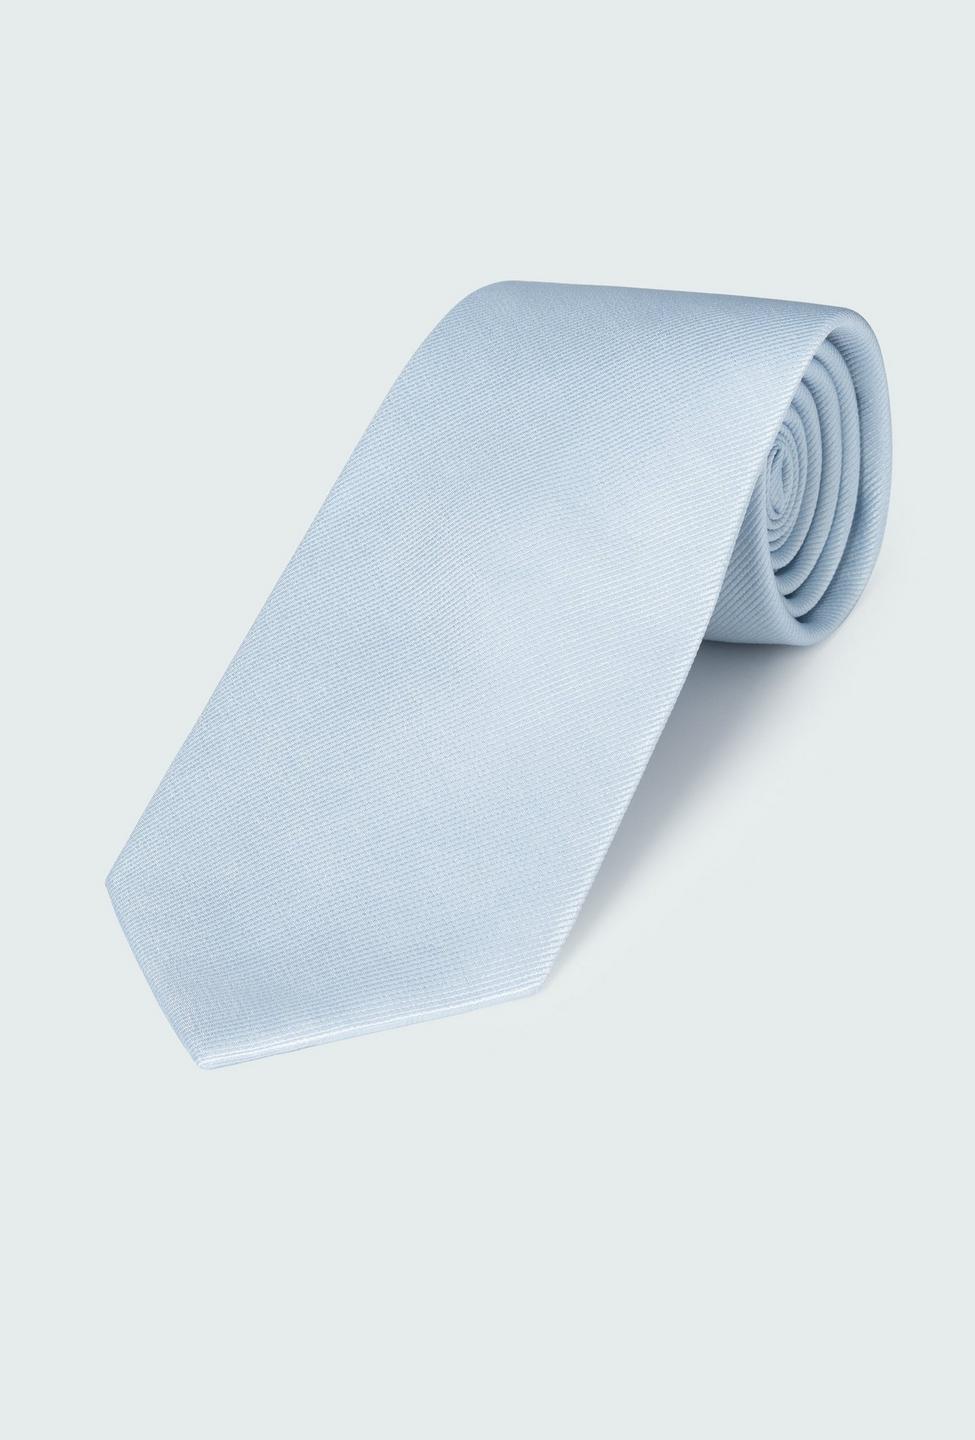 Blue tie - Solid Design from Indochino Collection